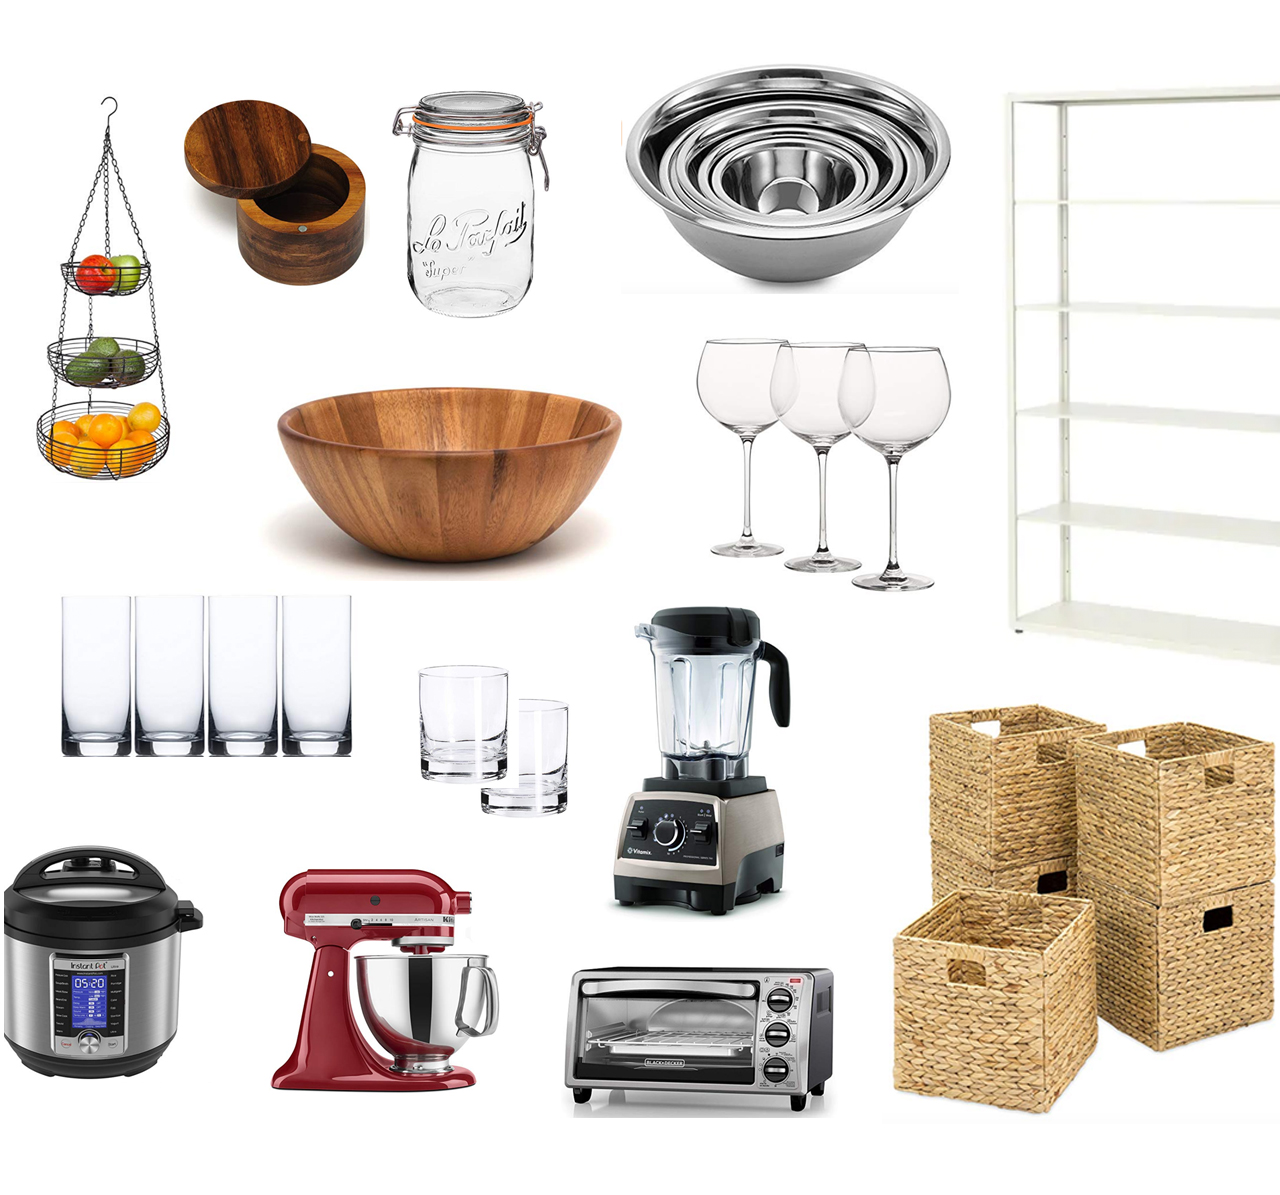 Minimalist Kitchen Makeover Products and Accessories